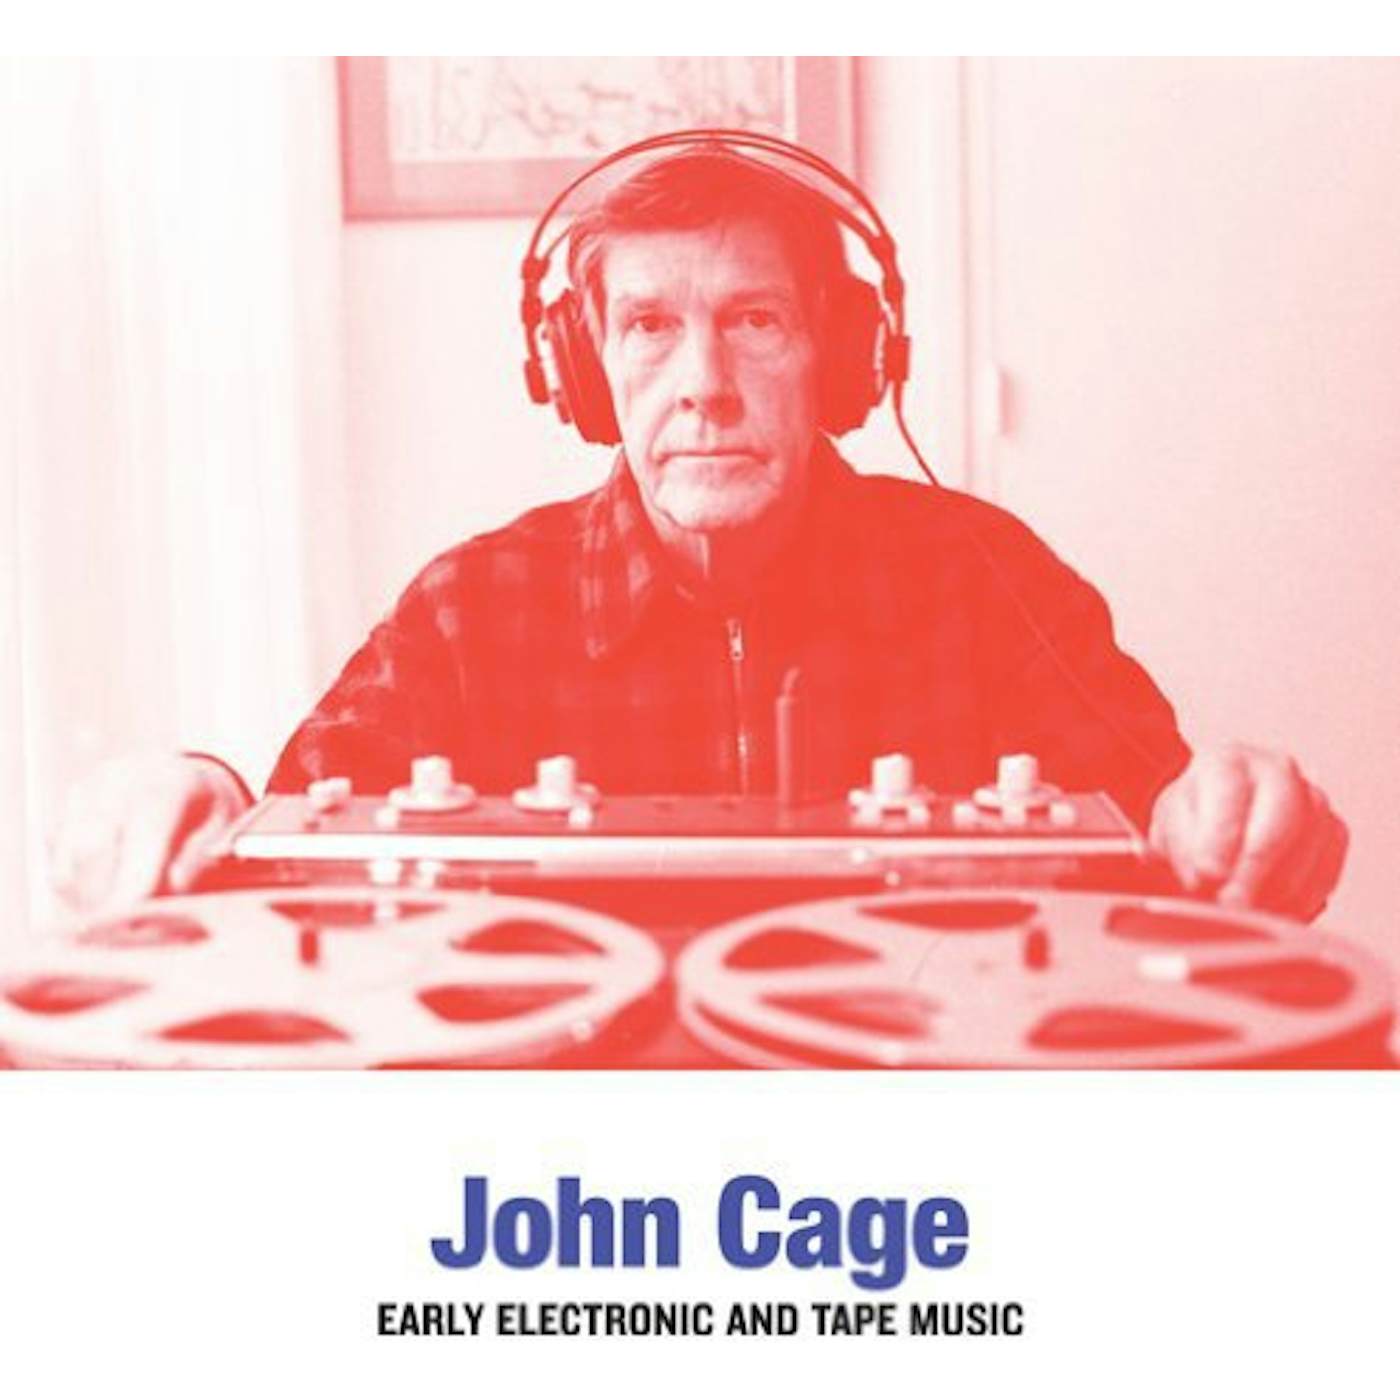 John Cage Early Electronic And Tape Music Vinyl Record